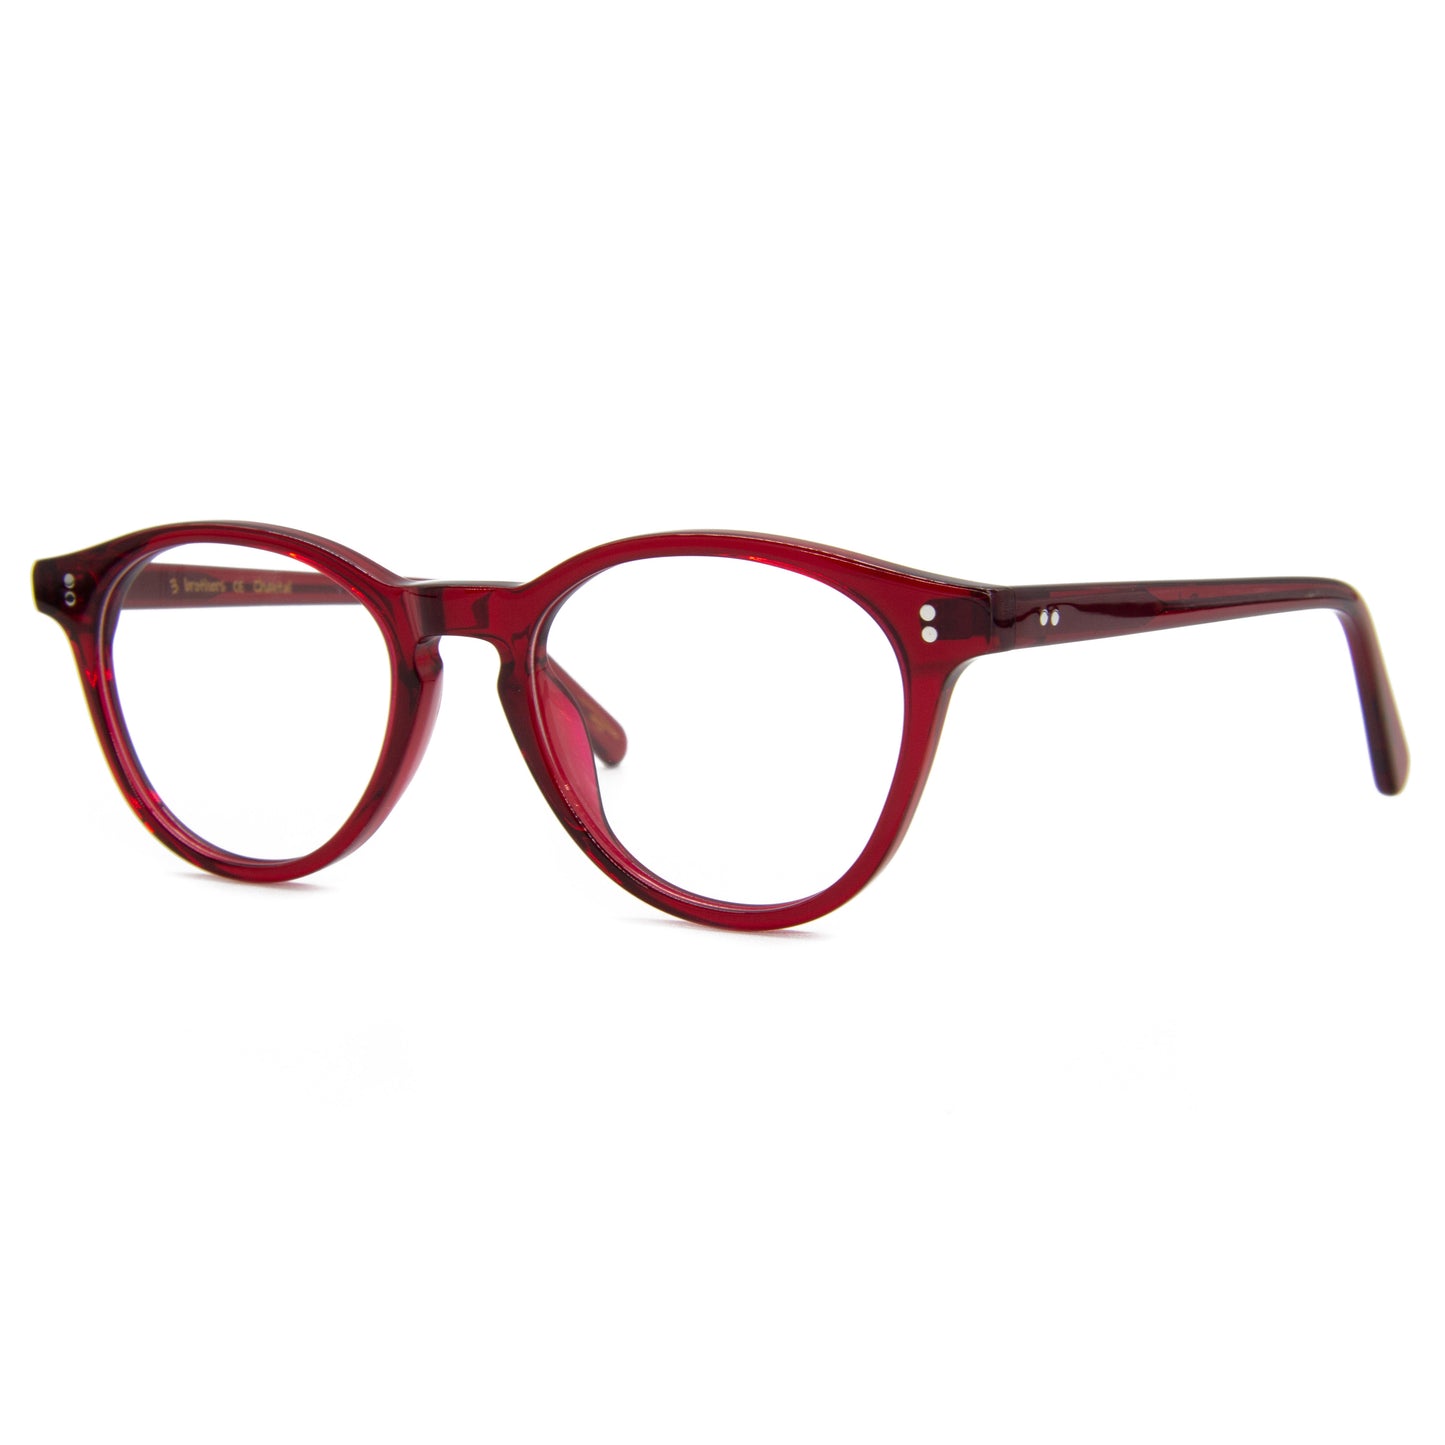 3 brothers - Chantal - Red - Prescription Glasses - Side